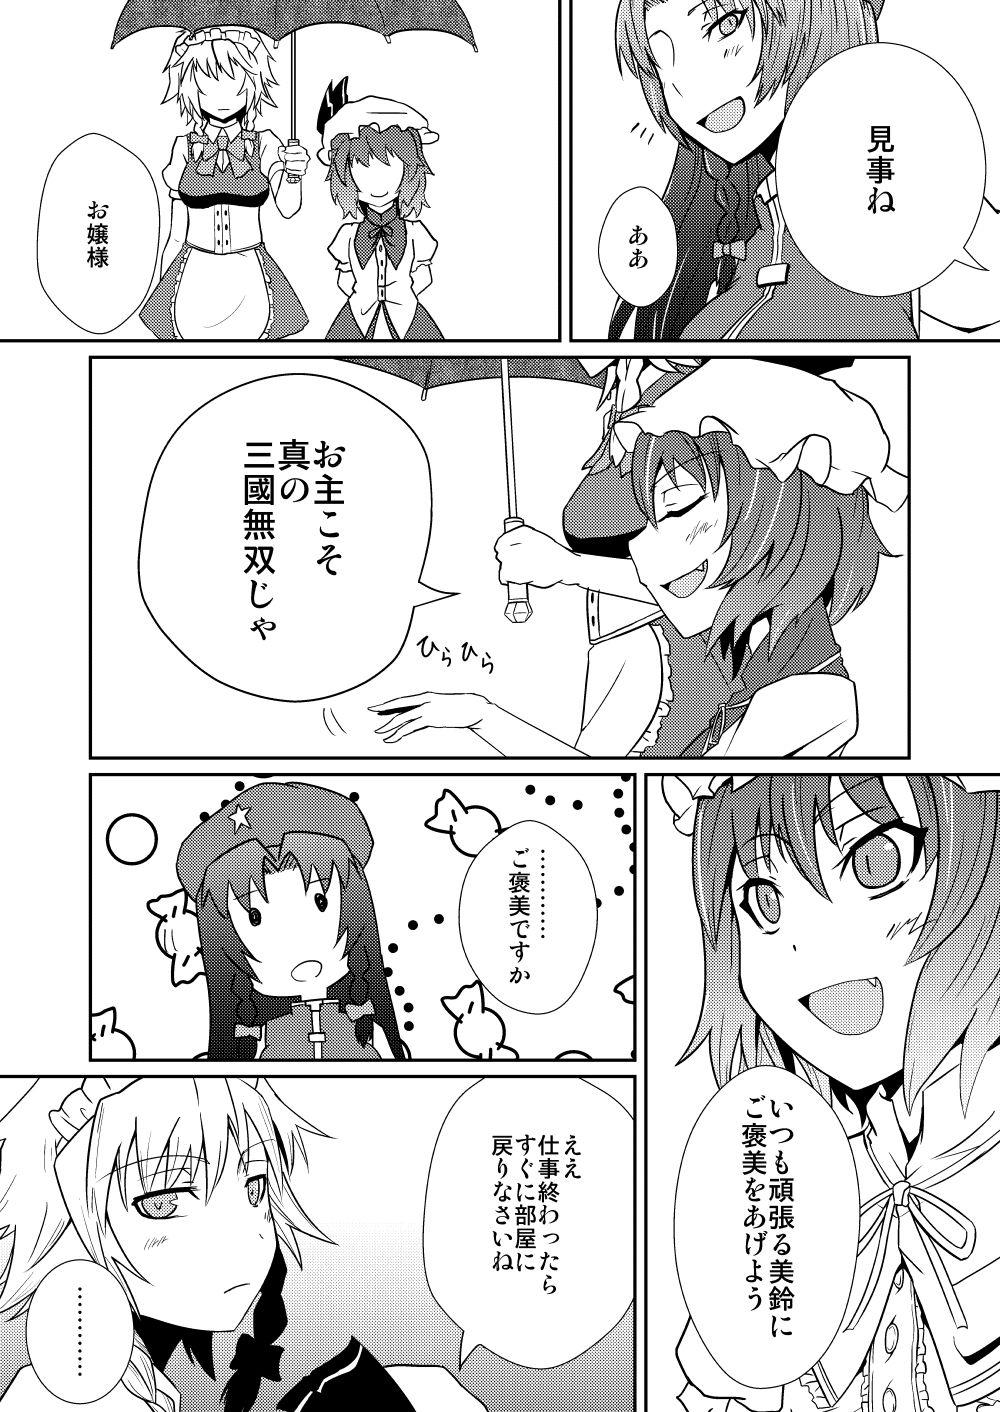 Livesex Hong Meiling no Hi - Hatsujouki - Touhou project Gay Longhair - Page 4